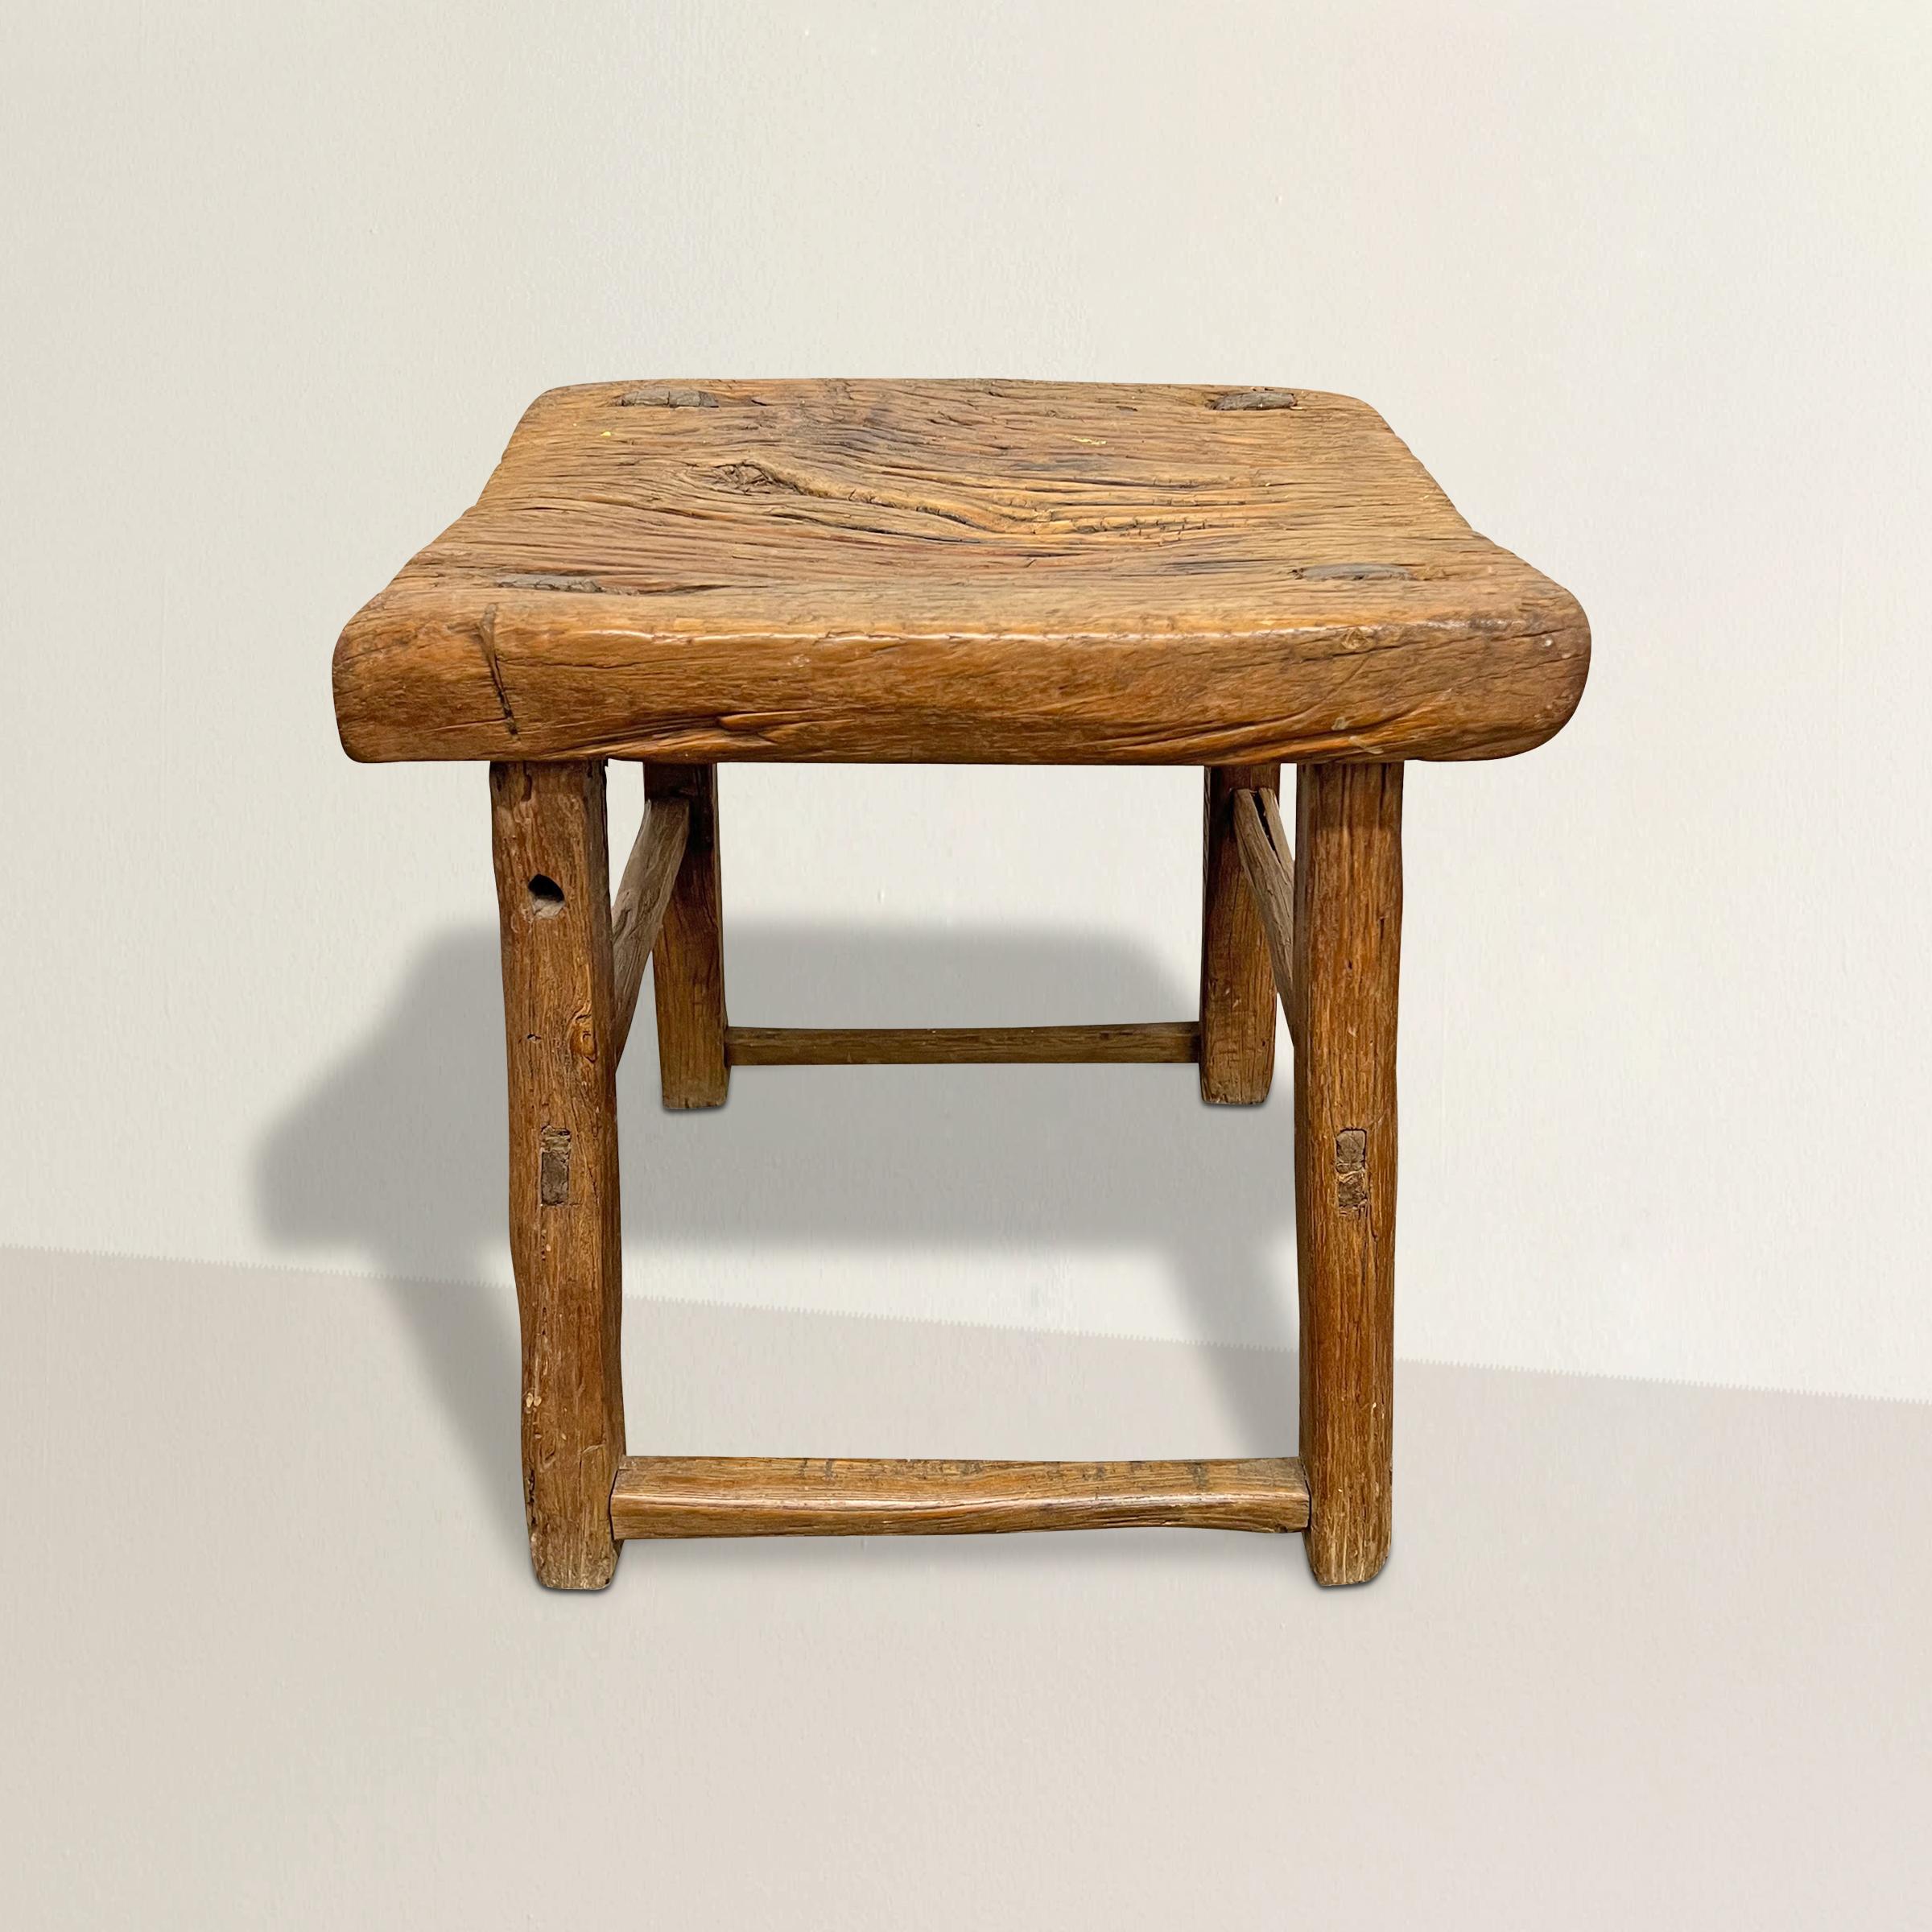 This early 20th-century provincial Chinese stool or side table, expertly crafted from well-weathered elmwood, tells a story etched in its grain and adorned with a patina that only the hands of time could impart. Its versatile design makes it ideal